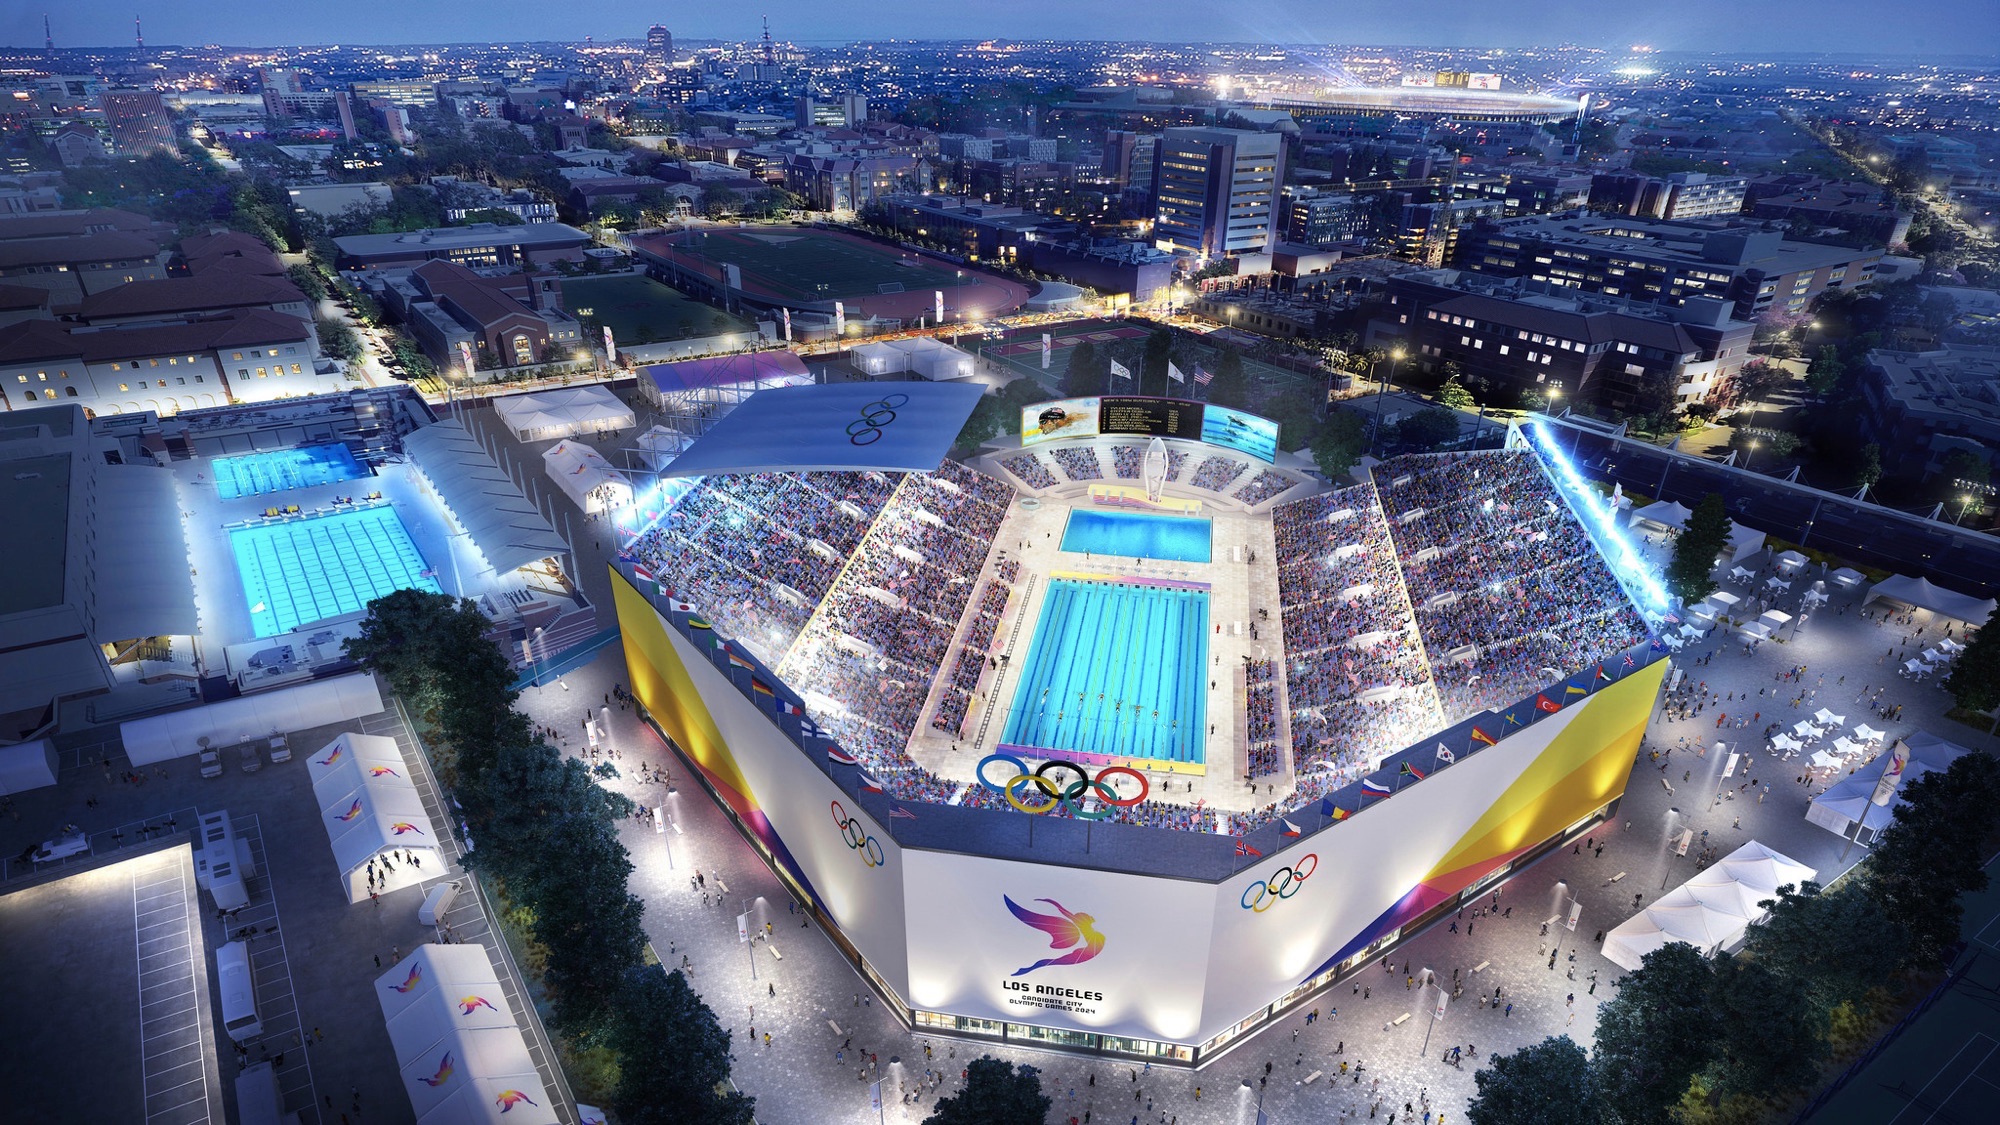 Swimming at Dedeaux Field? That's the Plan for LA 2024 Olympics